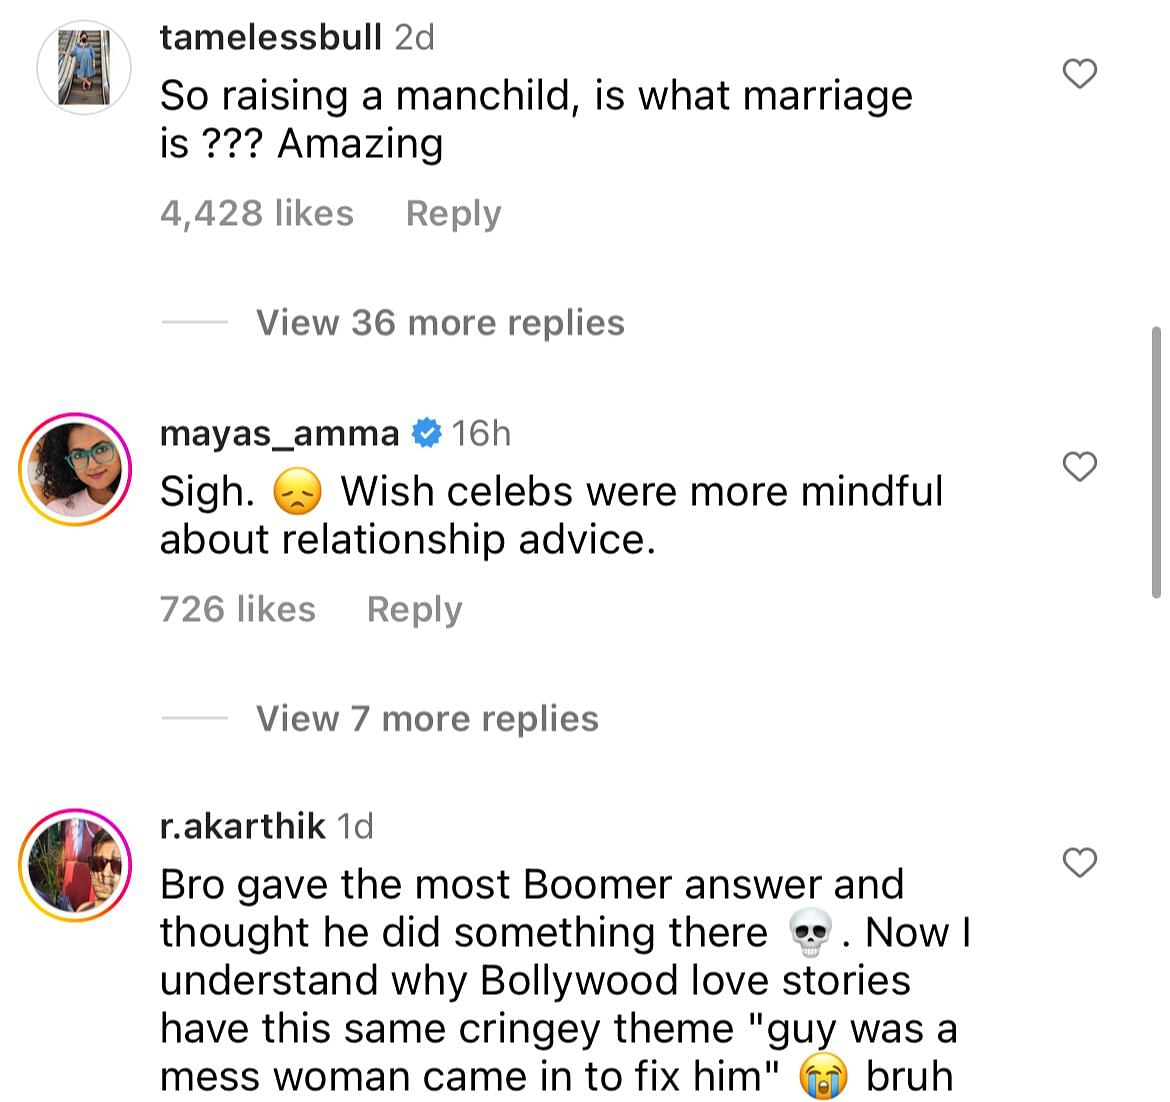 Reacting to Shahid Kapoor's comment, a social media user joked, "Bro's still in his KABIR SINGH character'.